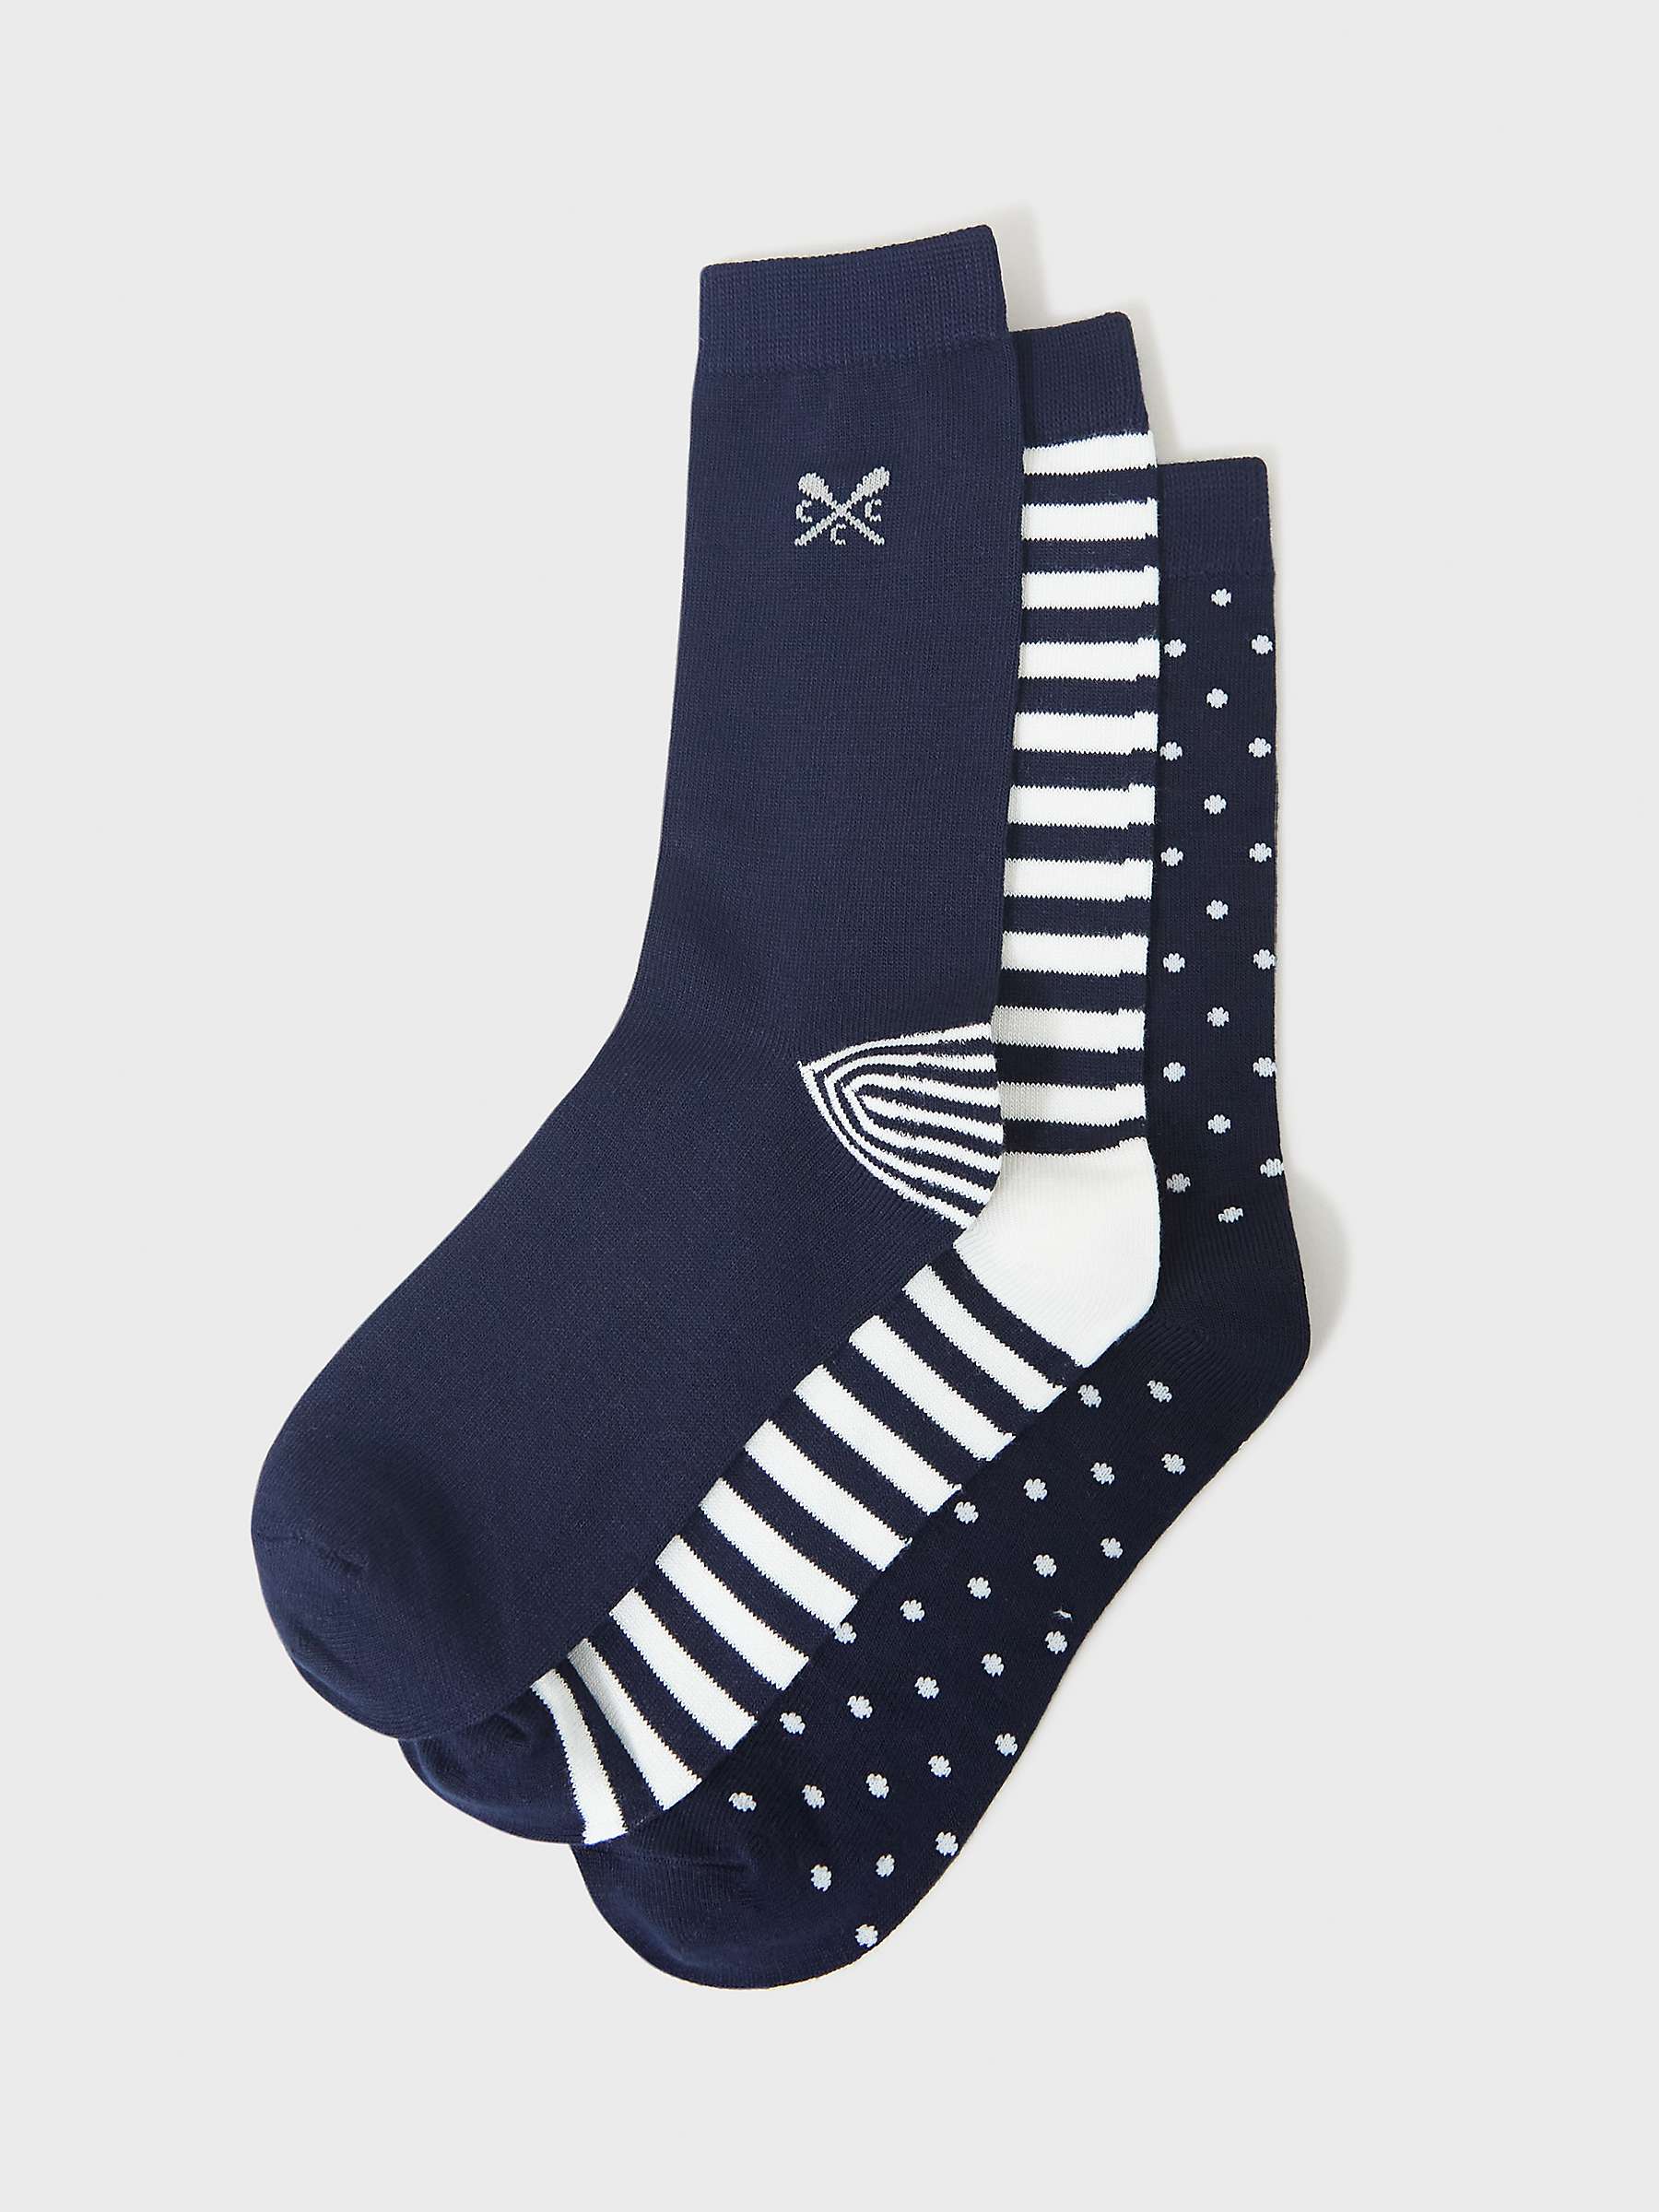 Buy Crew Clothing Spot and Stripe Bamboo Ankle Socks, Pack of 3 Online at johnlewis.com